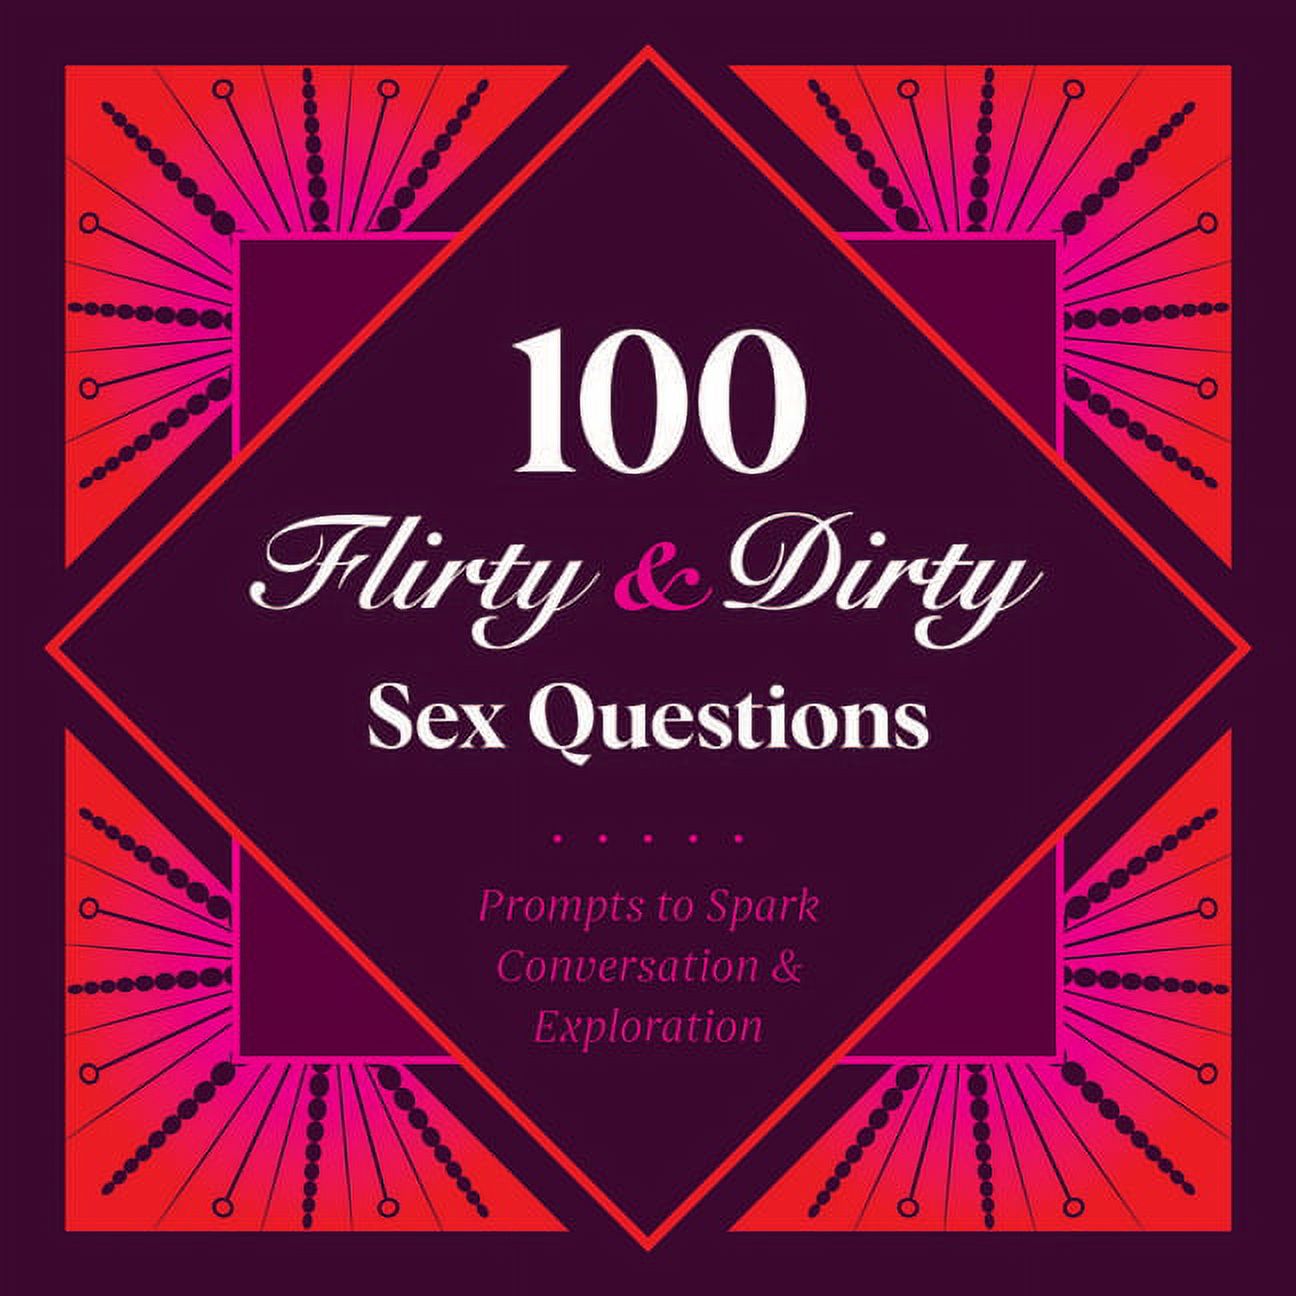 100 Flirty & Dirty Sex Questions (Other) - image 1 of 1